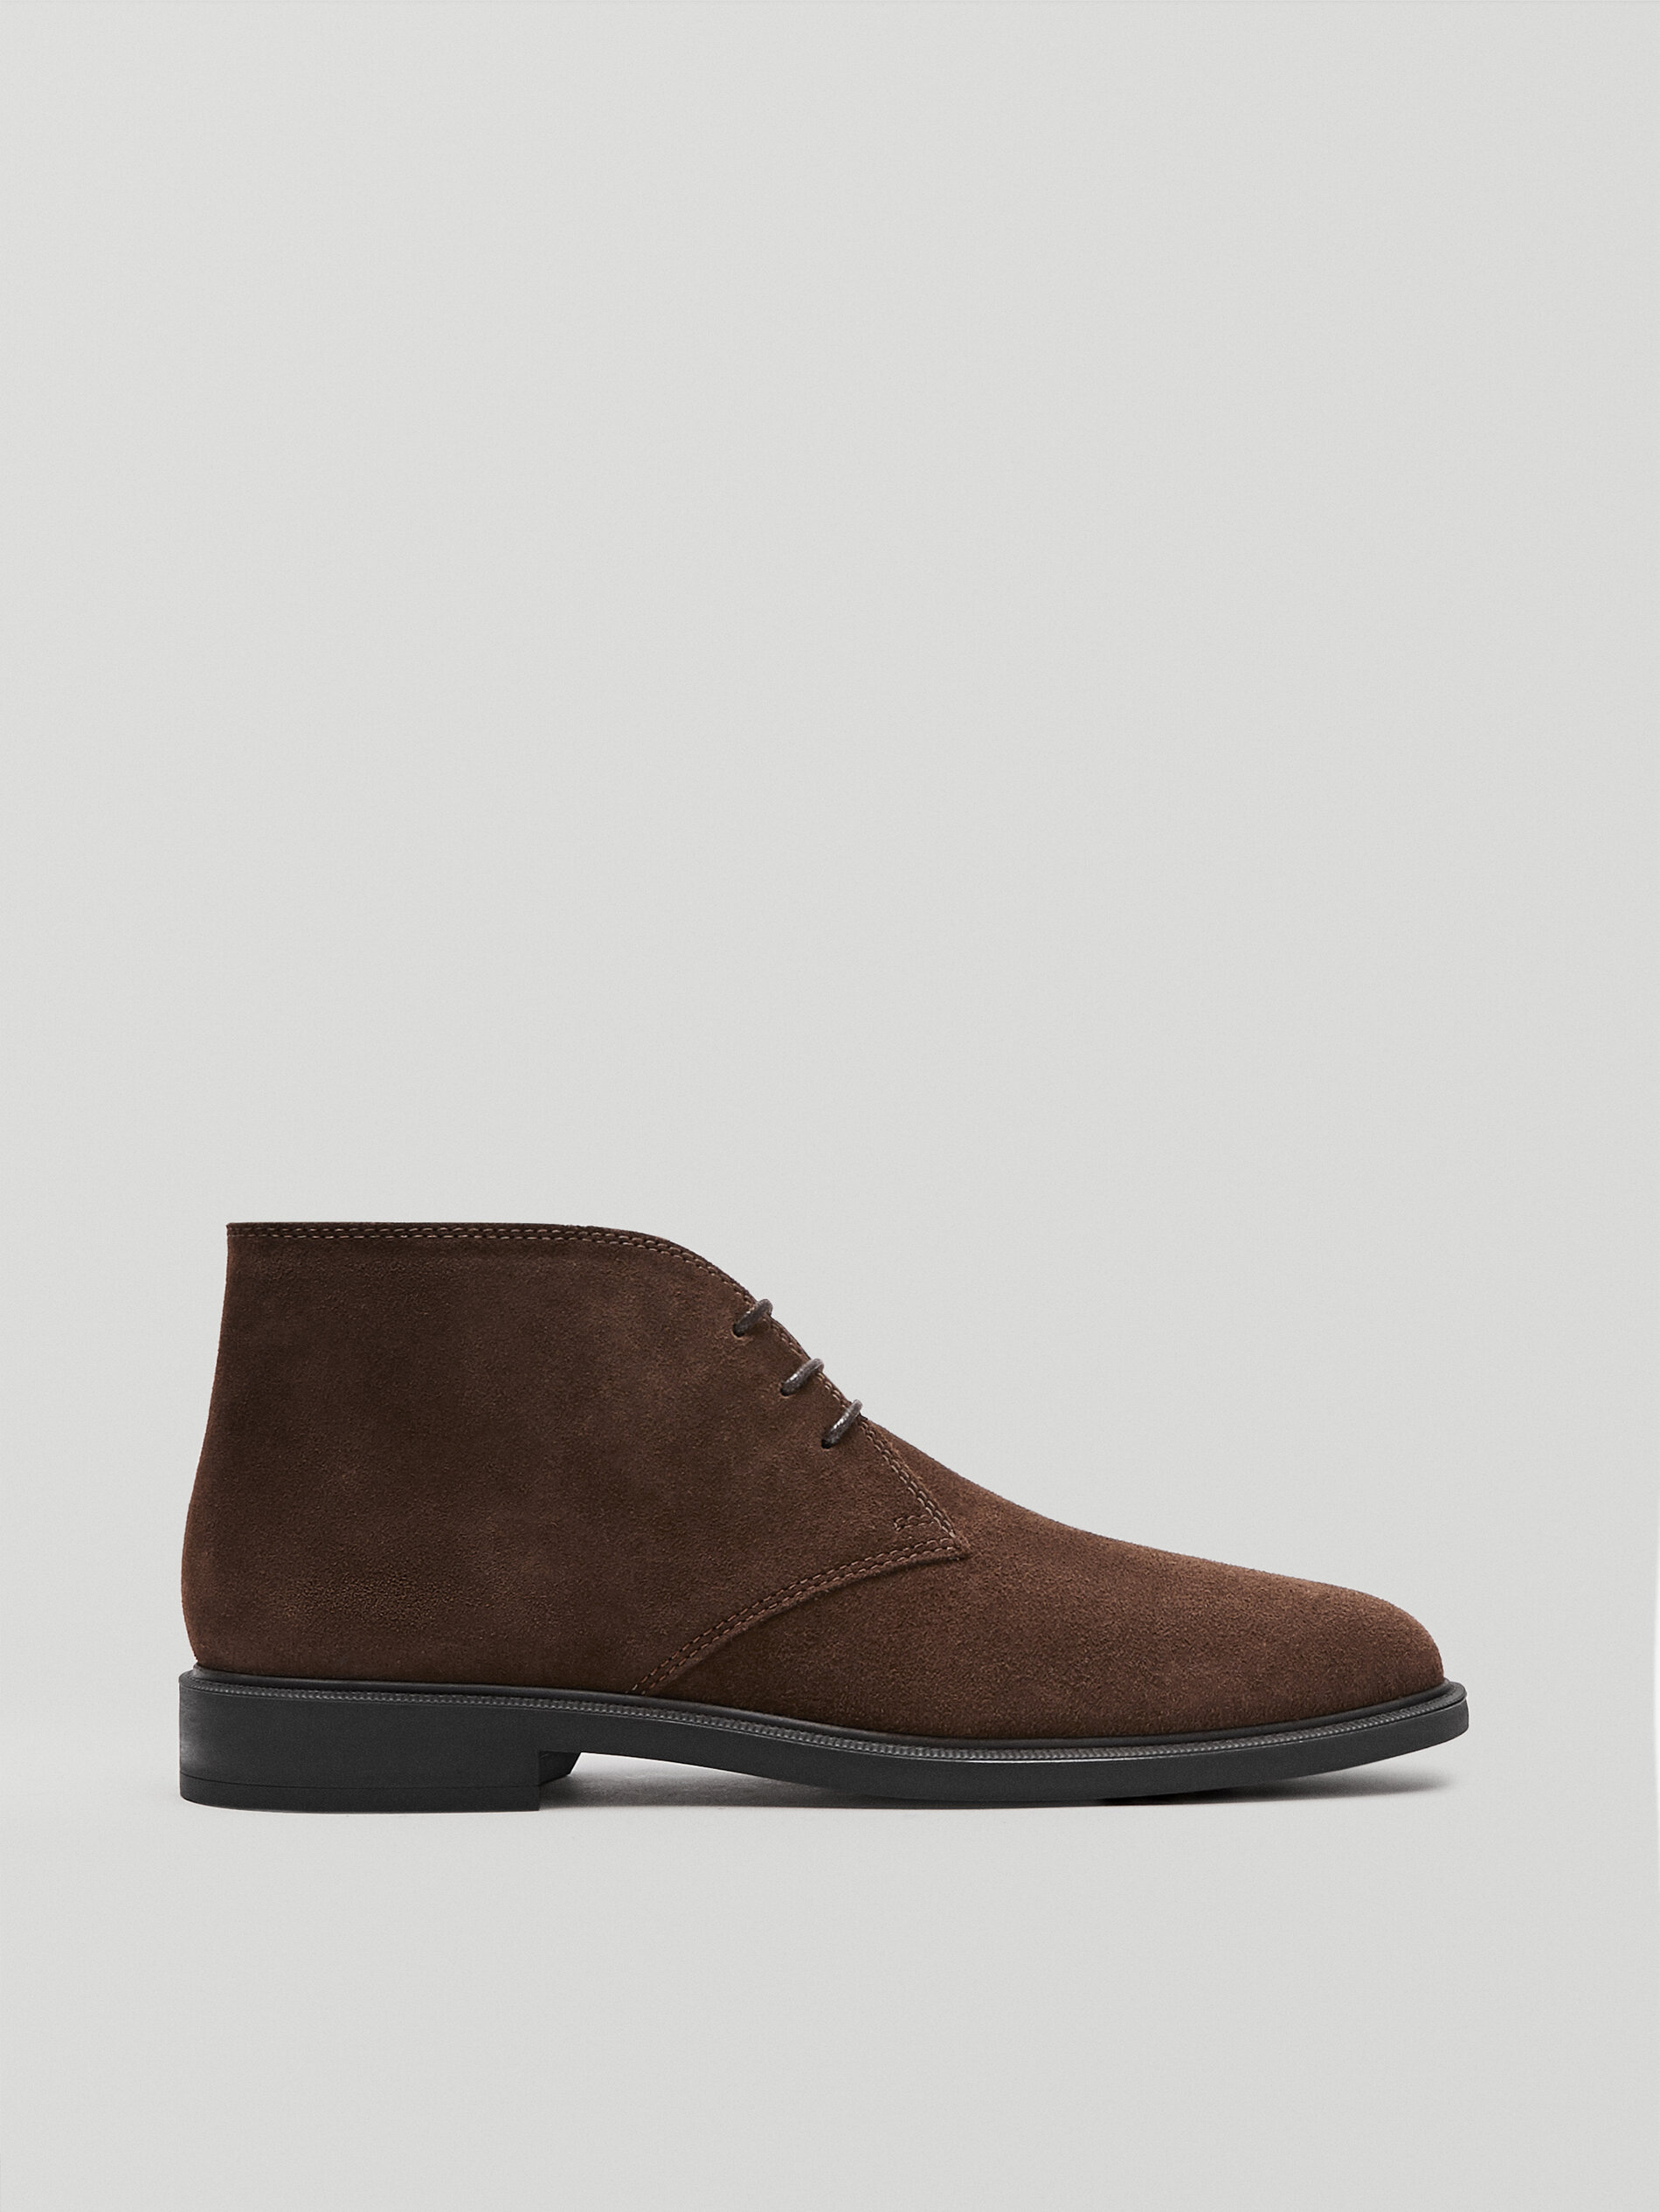 massimo dutti shoes online